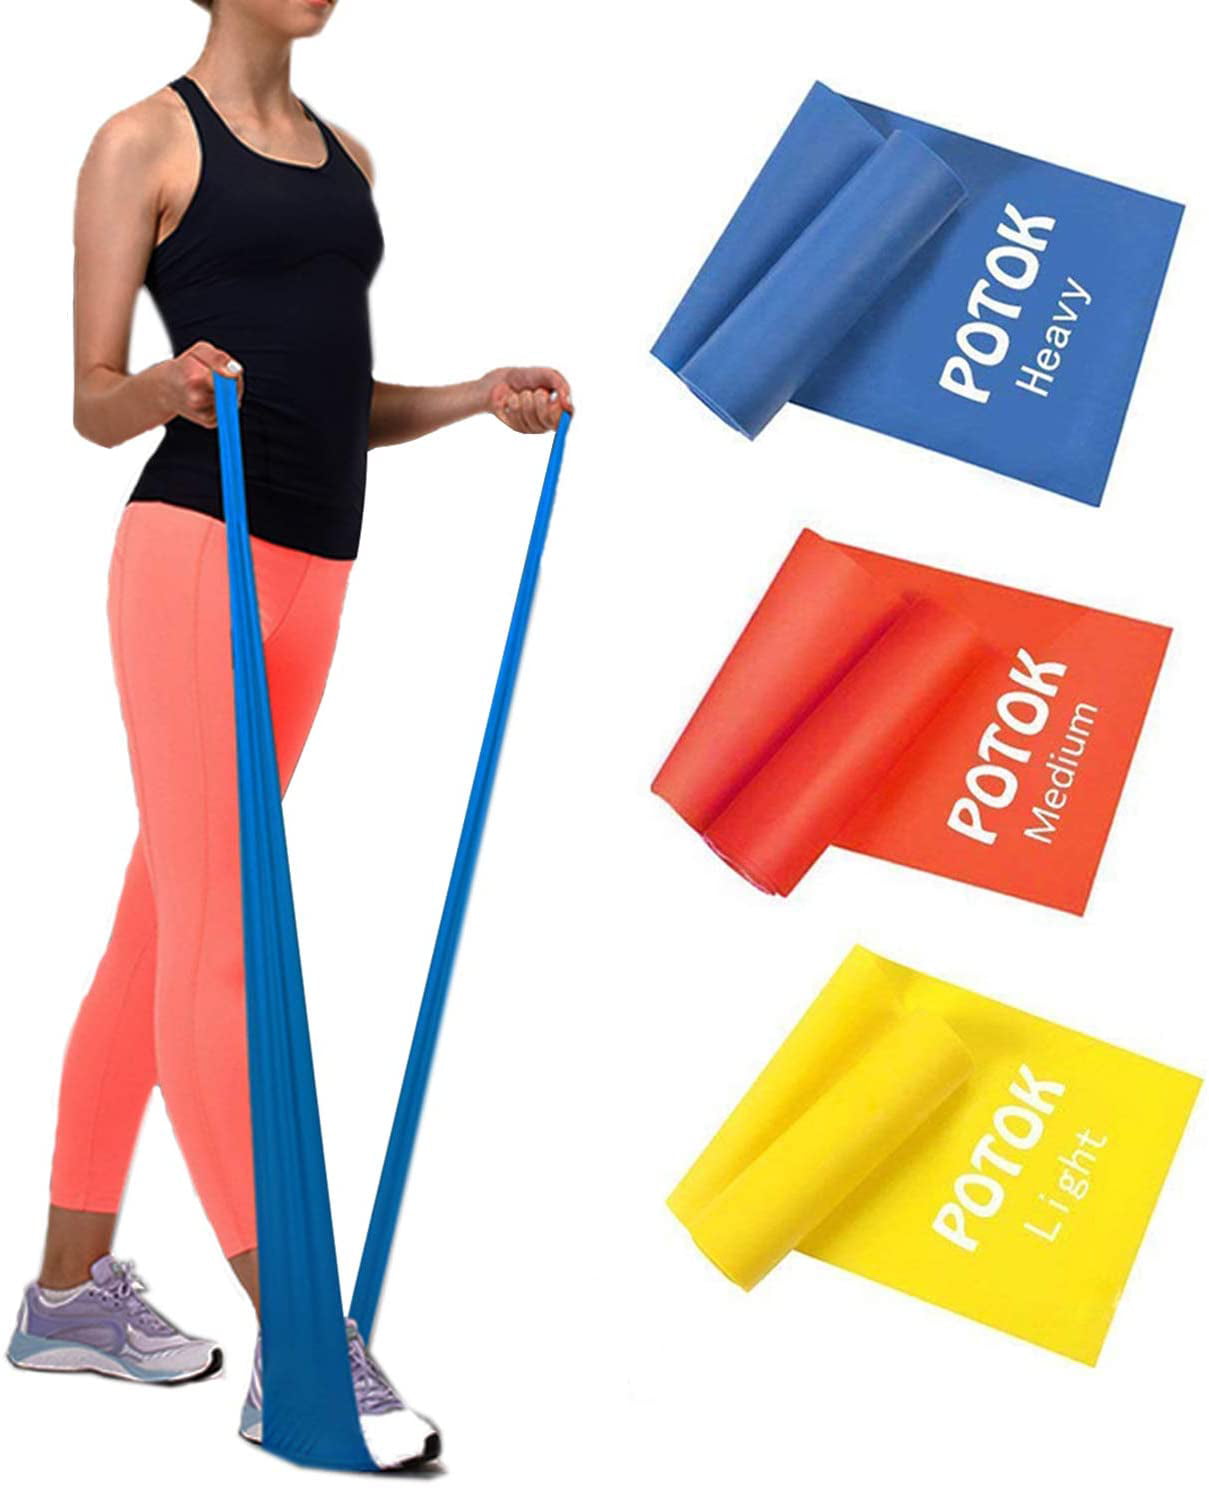 Details about   Elastic Resistance Bands Workout Resistance Bands Latex Circle Loop Non-slip 